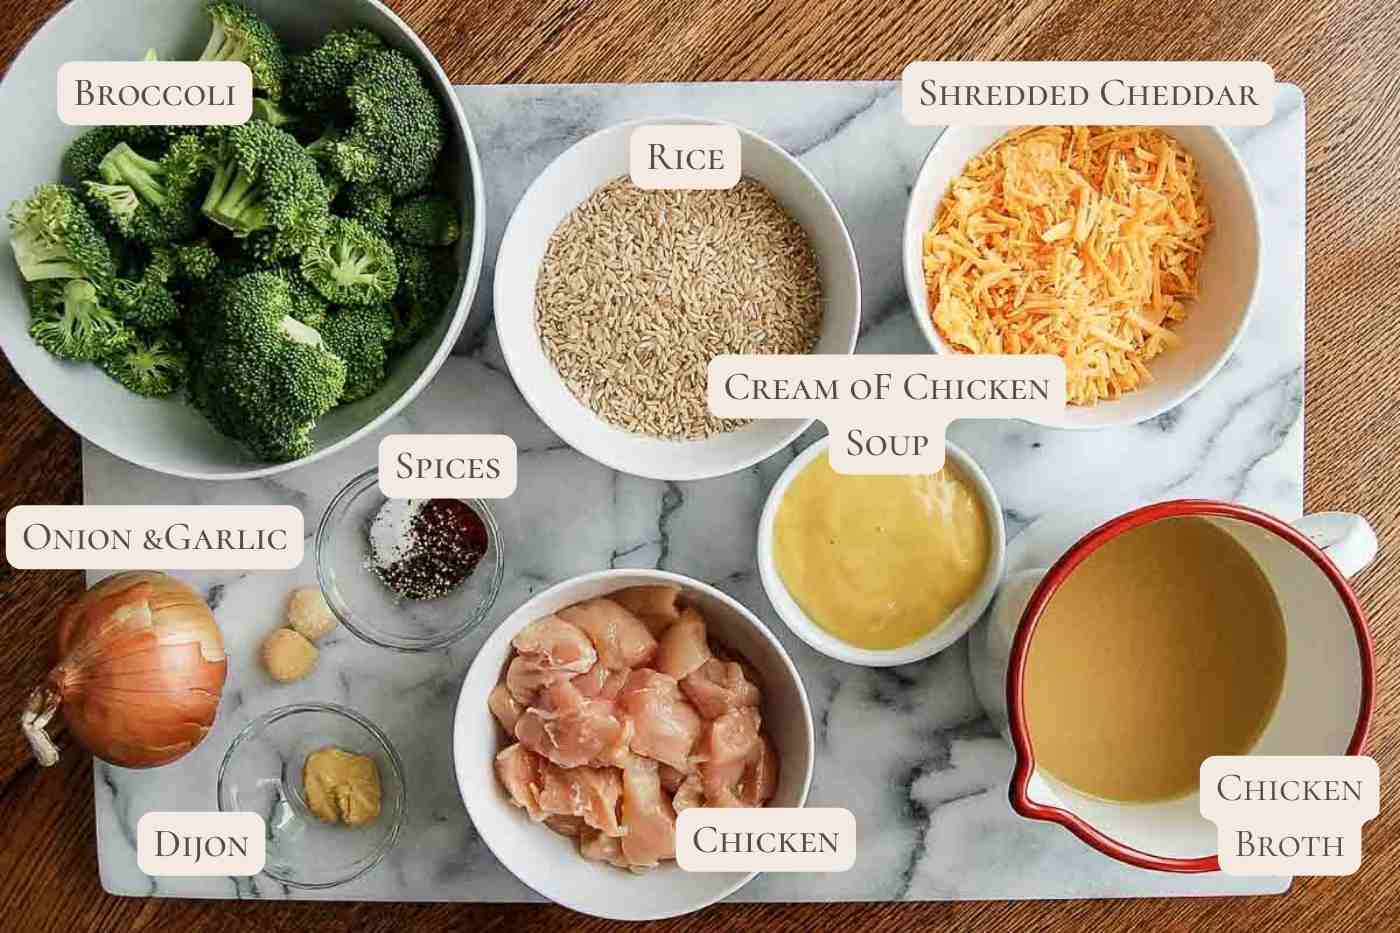 ingredients for crockpot chicken, broccoli and rice casserole with cheddar cheese on countertop.